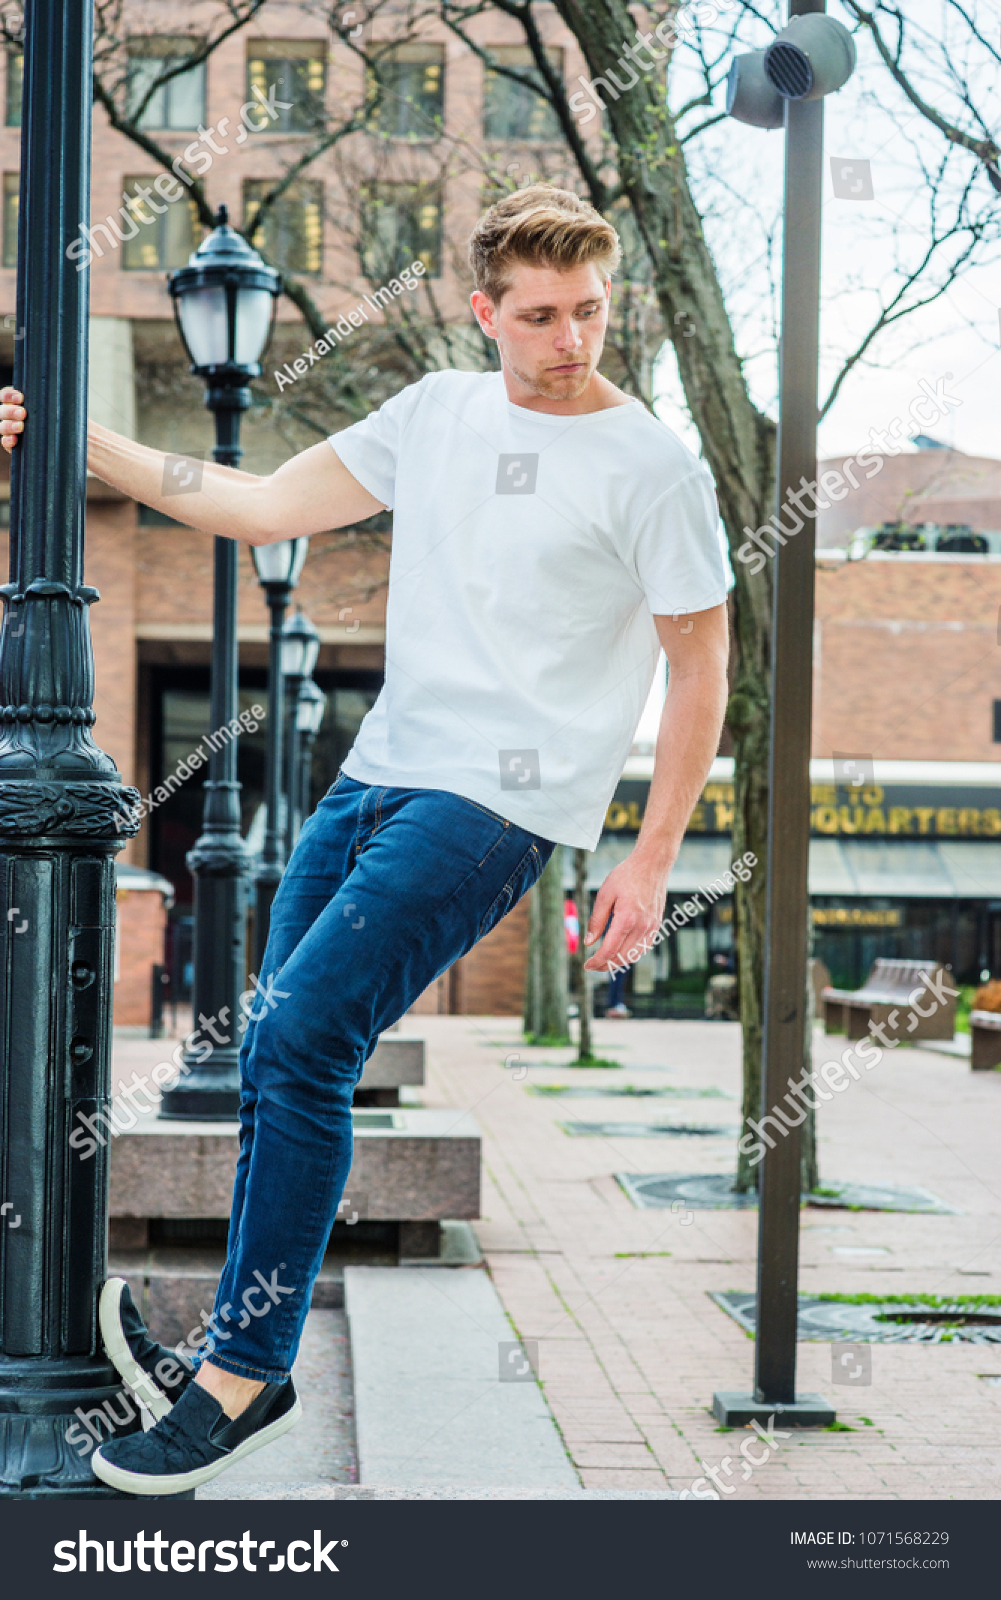 Black Shirt Blue Jeans And White Shoes Online Sale Up To 58 Off